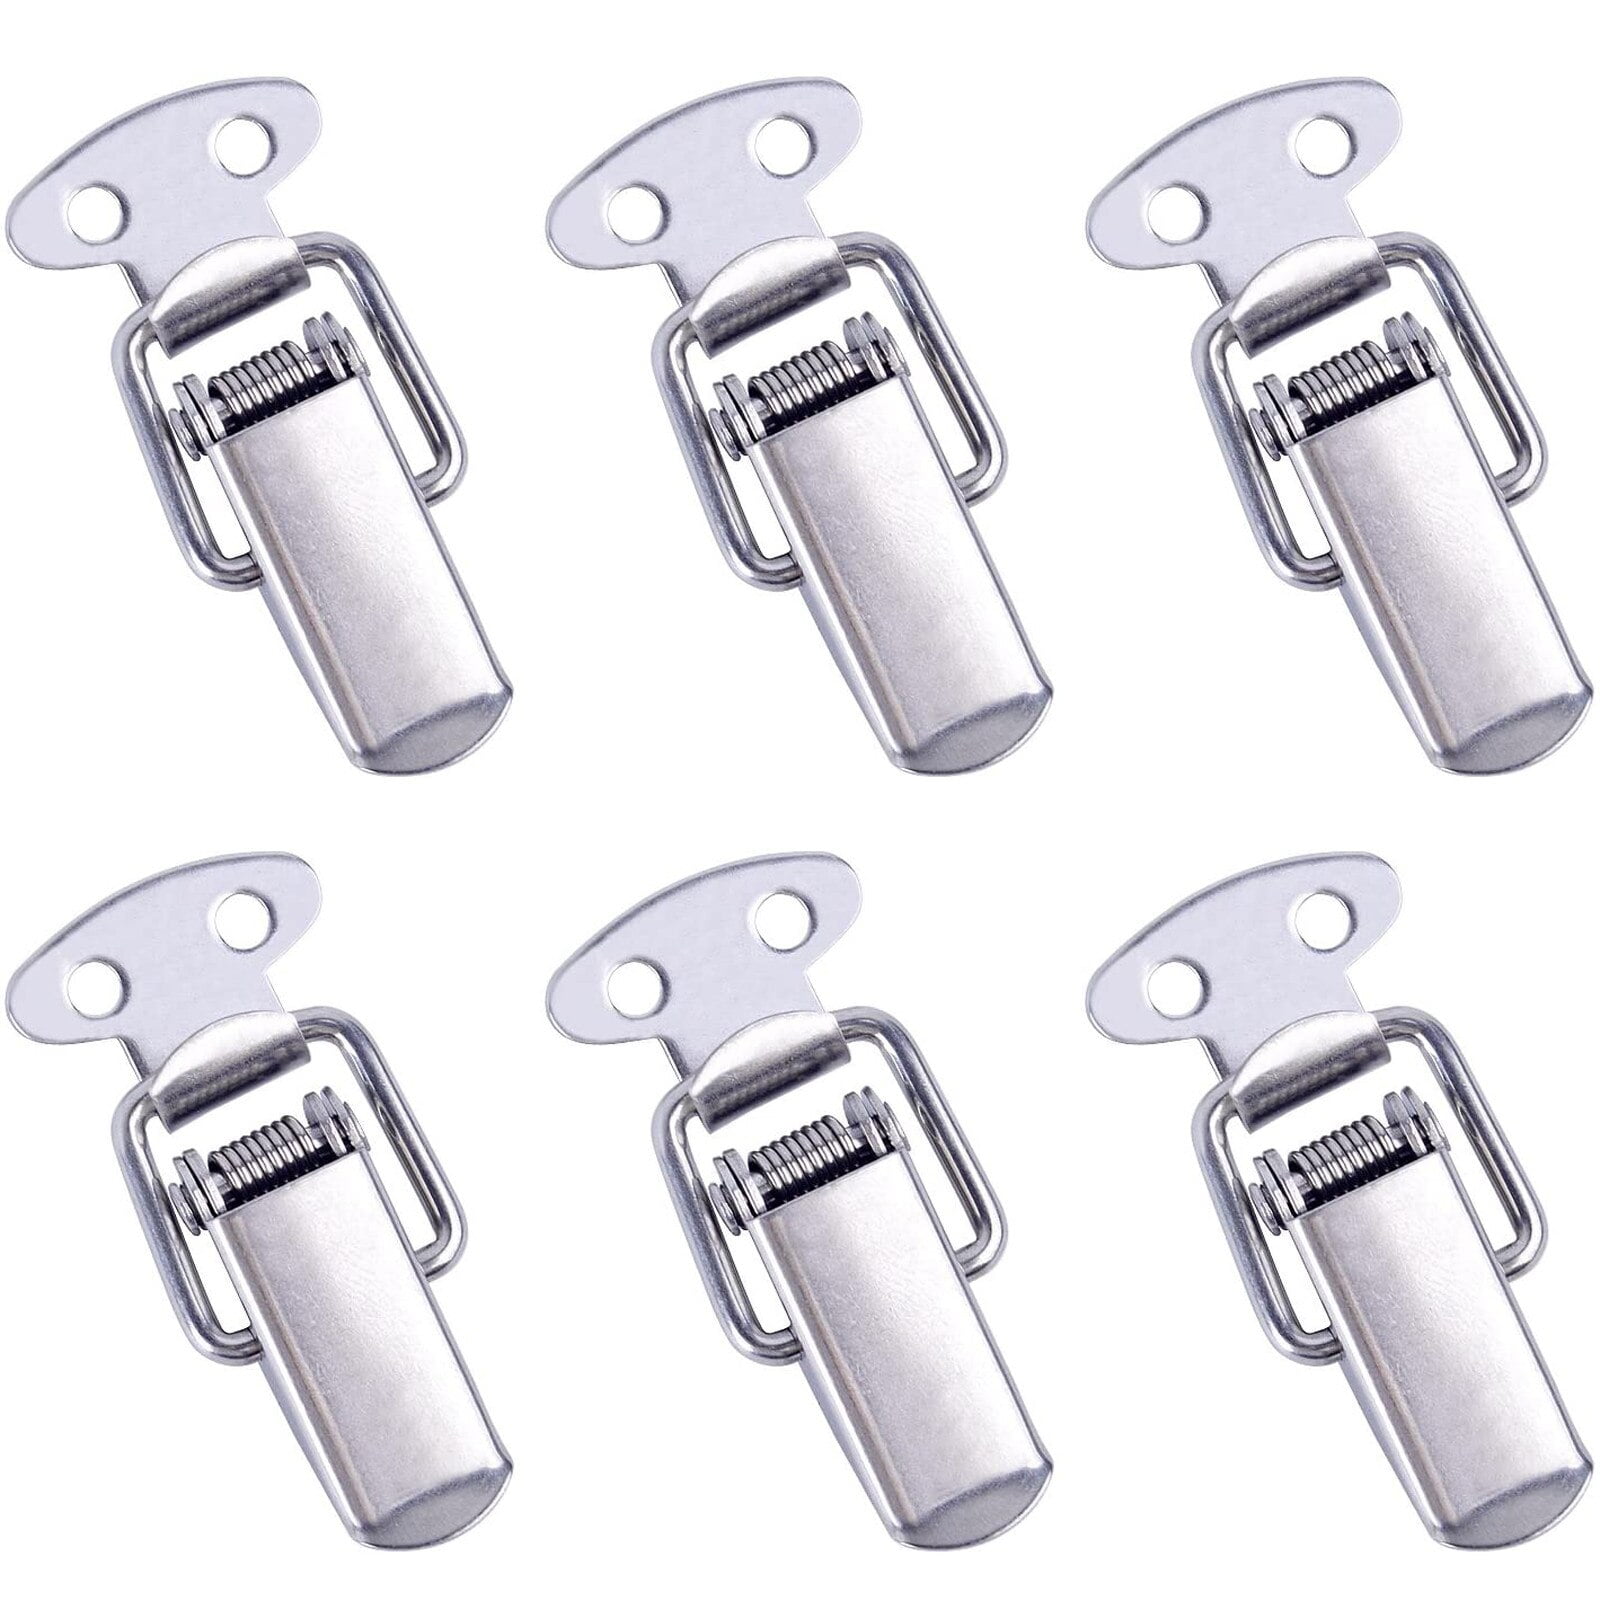 Stainless Steel Spring Loaded Toggle Latch Hardware Catch Clamp Clip ...